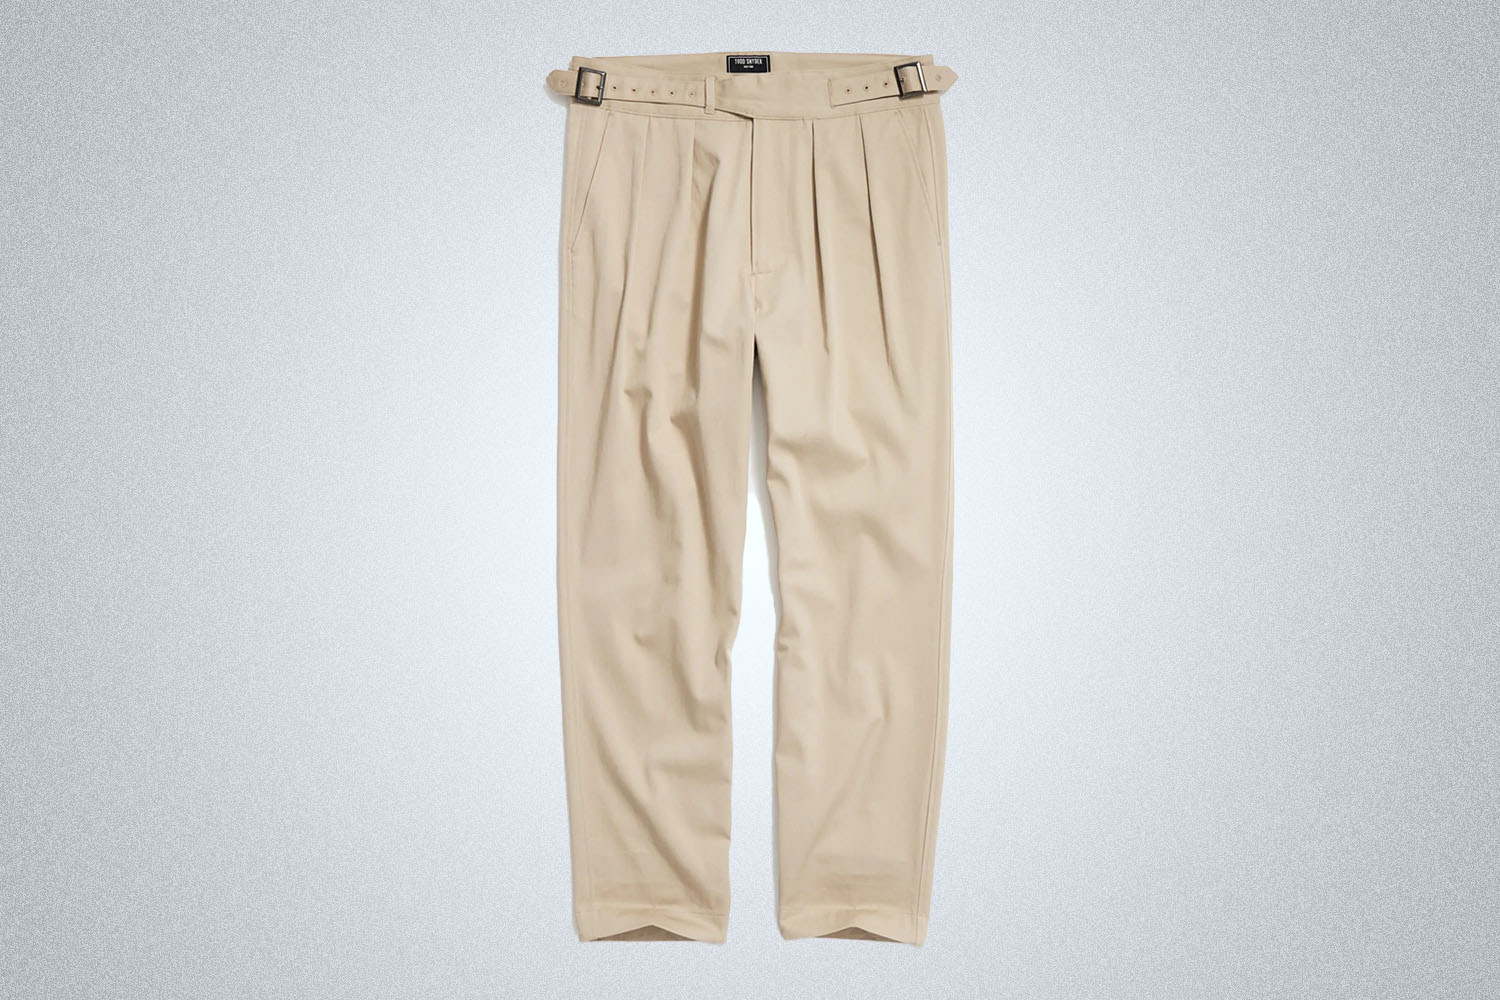 a pair of tan Gurkha pants from Todd Snyder on a grey background